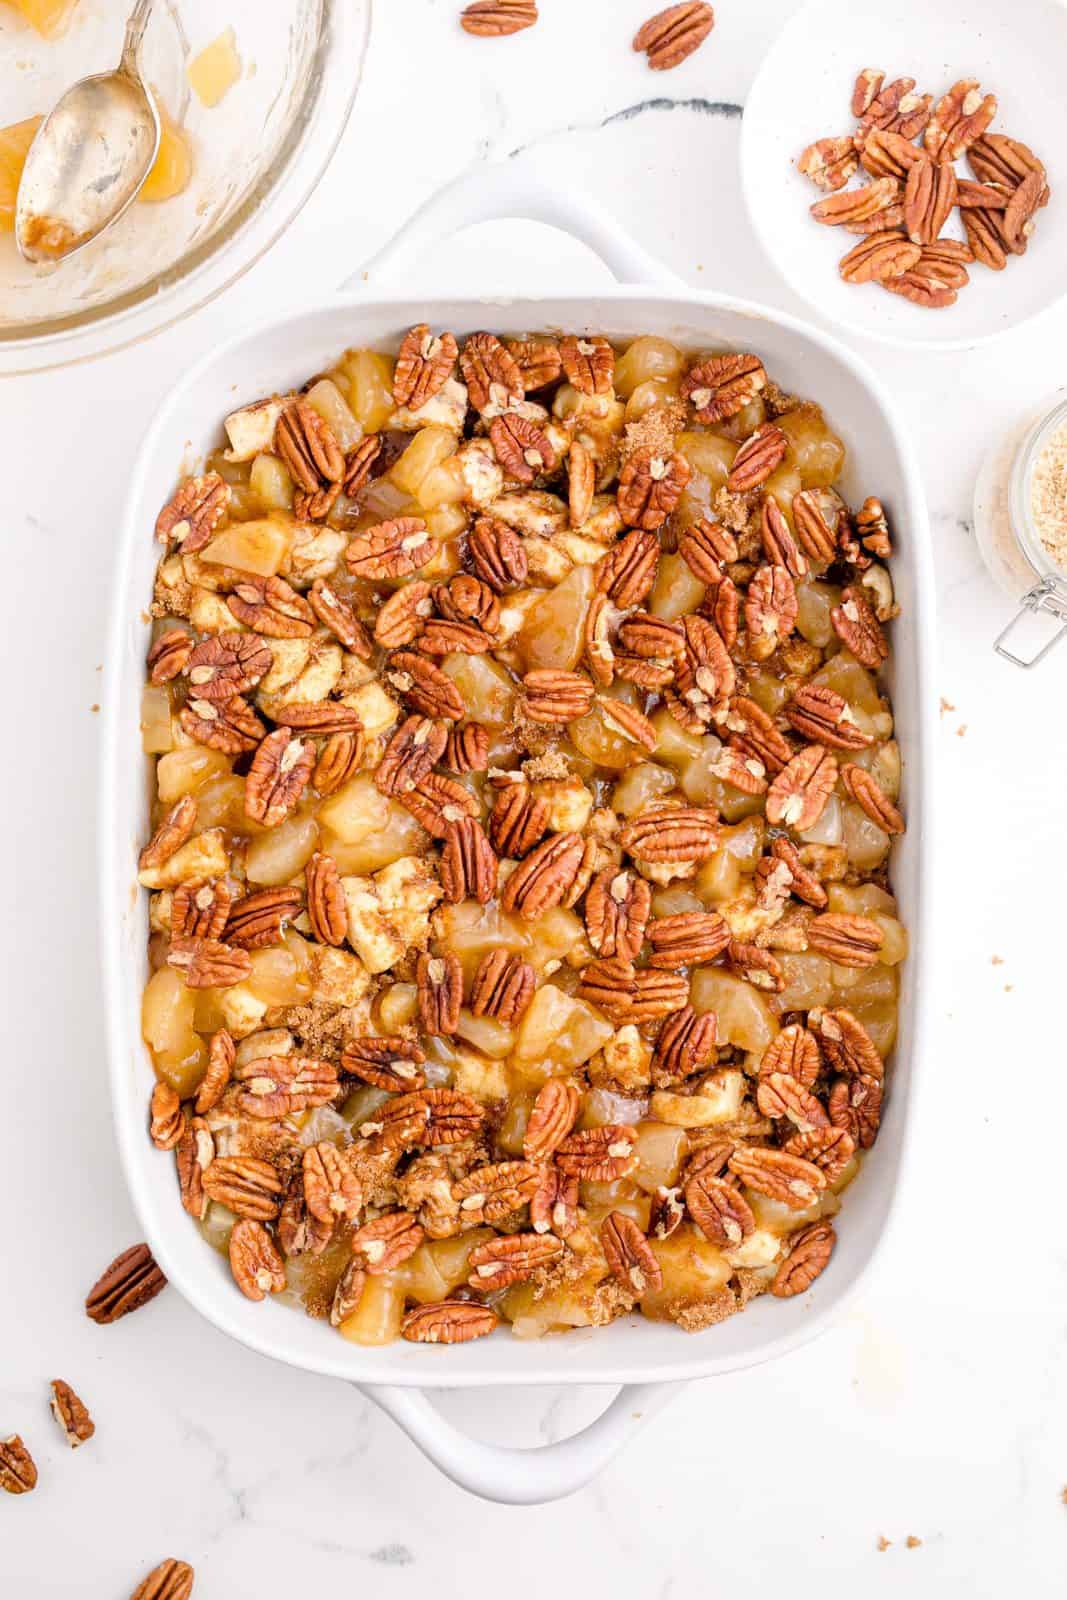 Pecans topping casserole.